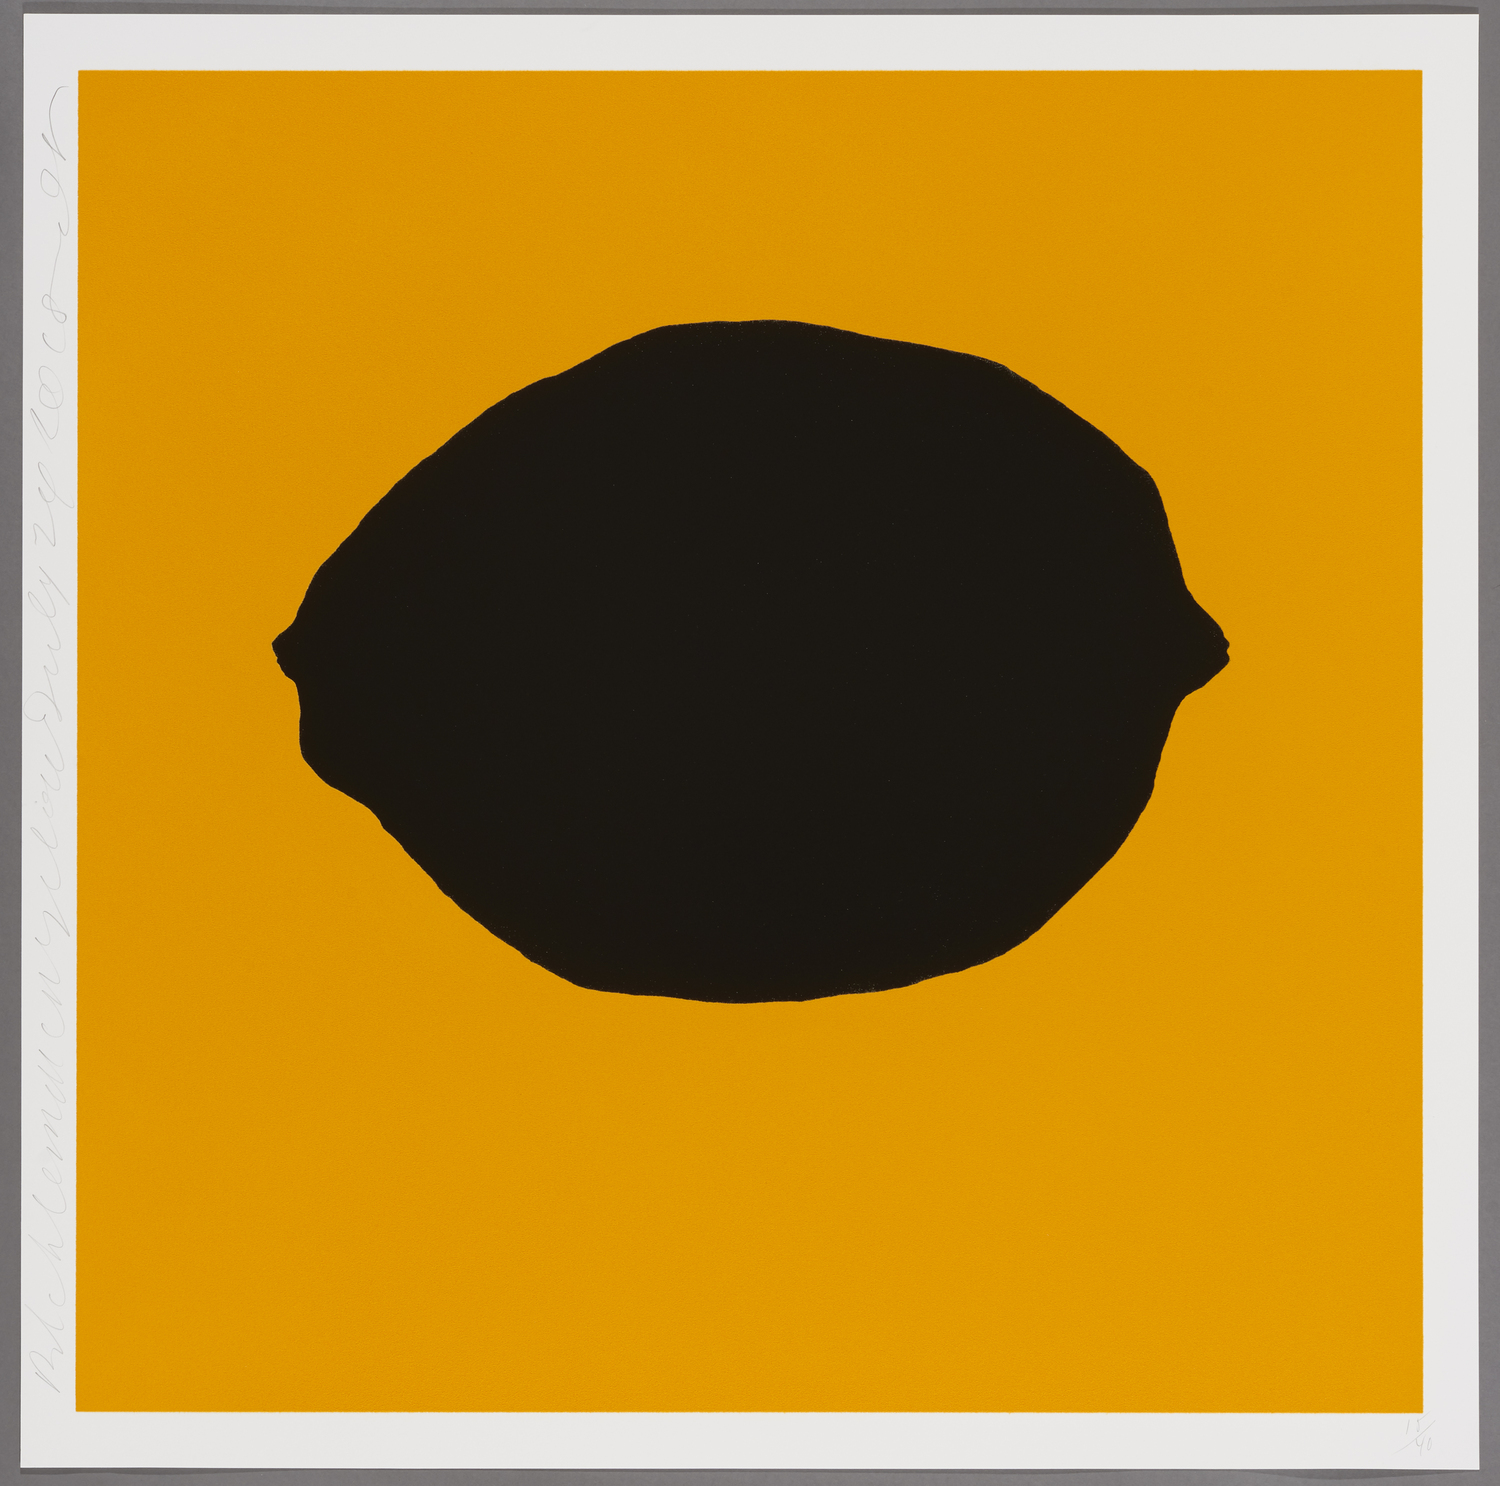 Donald Sultan (American (b. 1951))
Four Lemons: Black Lemon on Yellow, July 24, 2018, edition 15/40, 2018 
silkscreen with enamel ink and tar-like texture
39 x 39 in.
Collection of Jordan D. Schnitzer
Image: Aaron Wessling Photography, Courtesy of Jordan Schnitzer Family Foundation